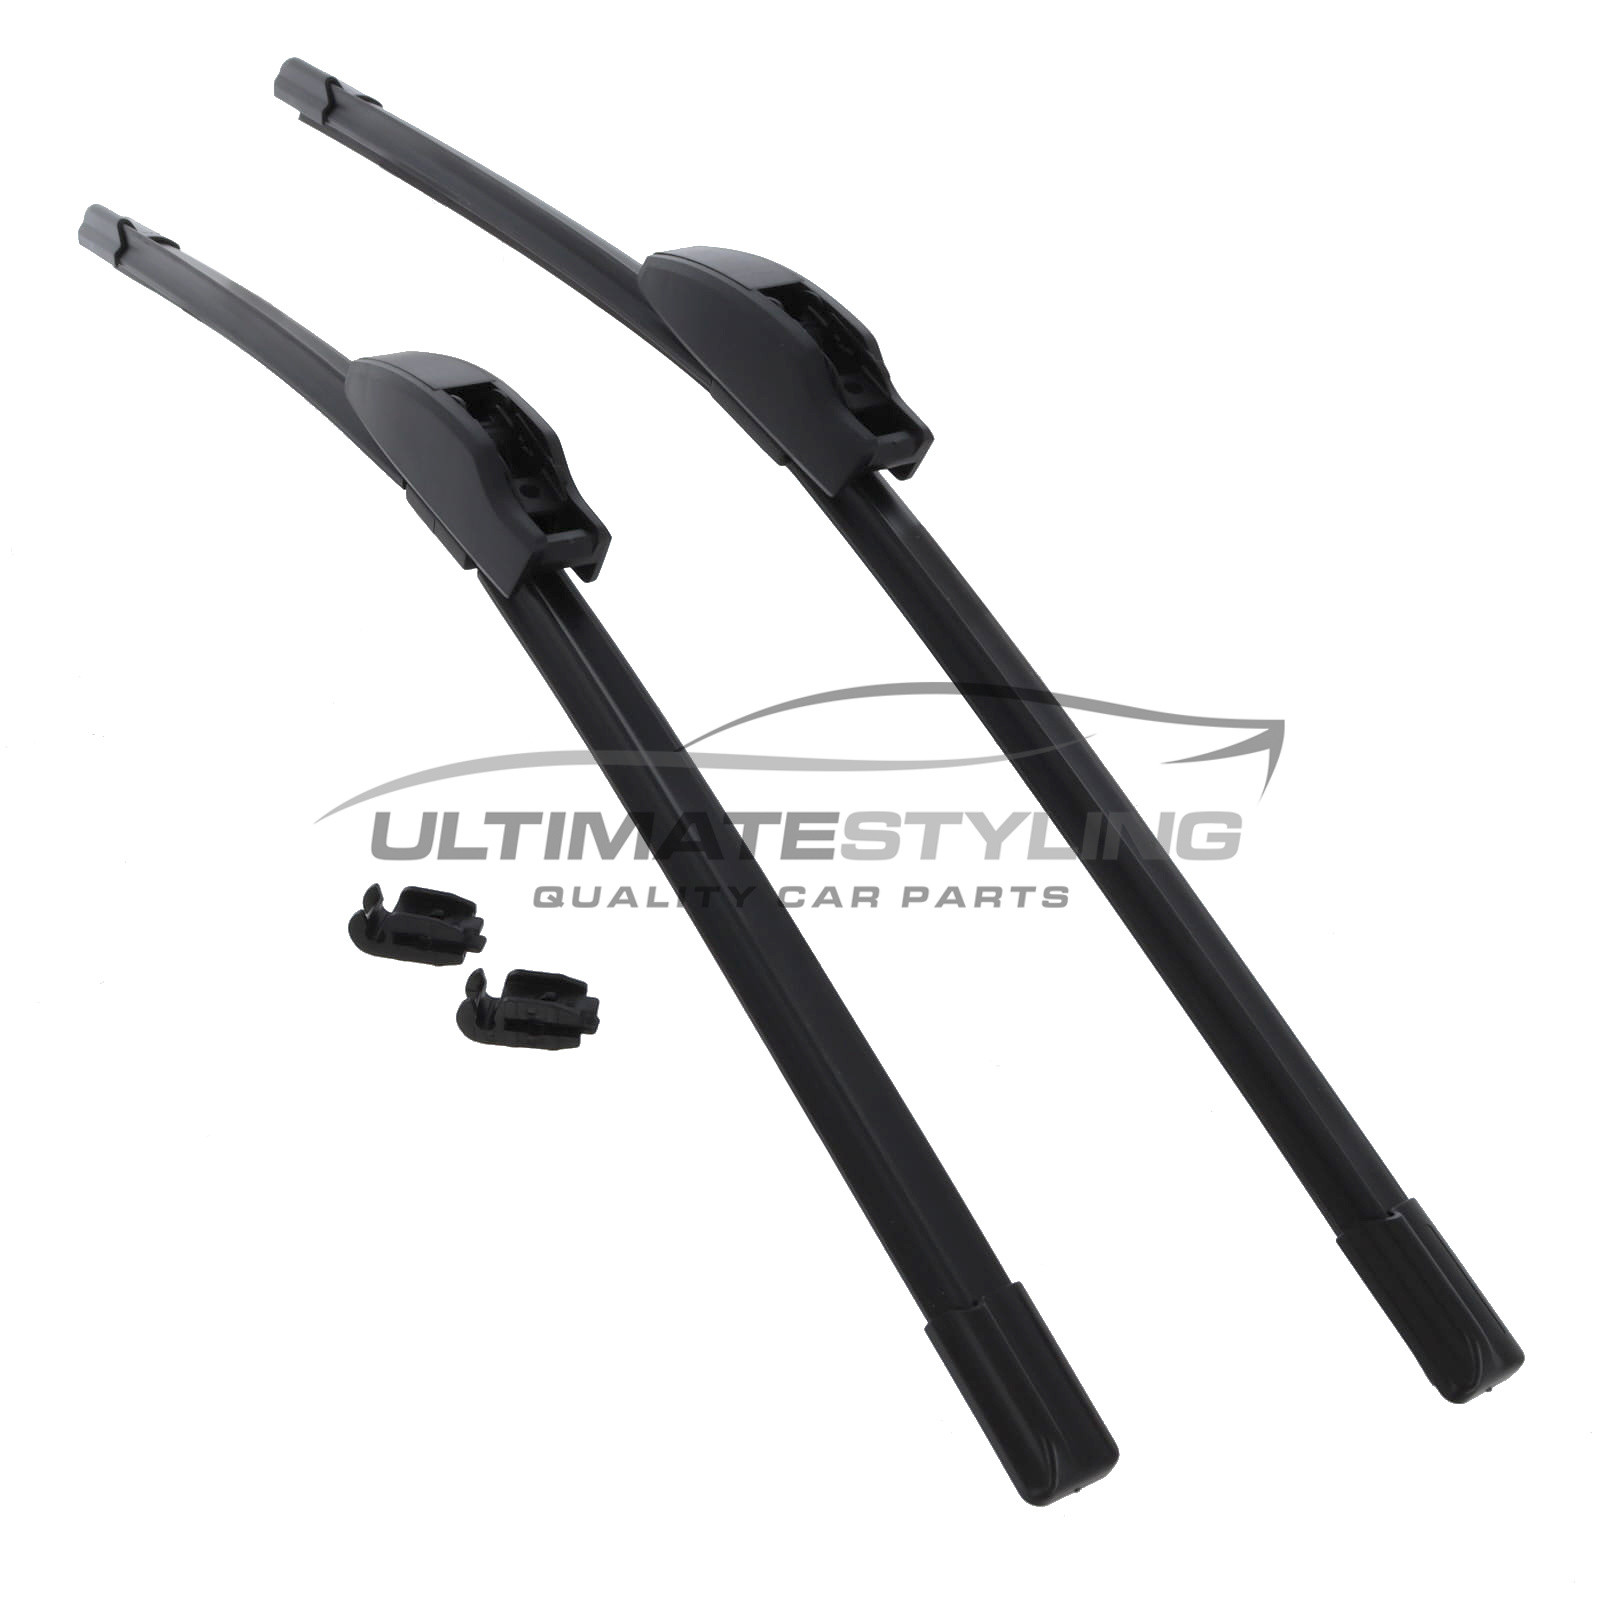 Drivers Side & Passenger Side (Front) Wiper Blades for Proton 1.3